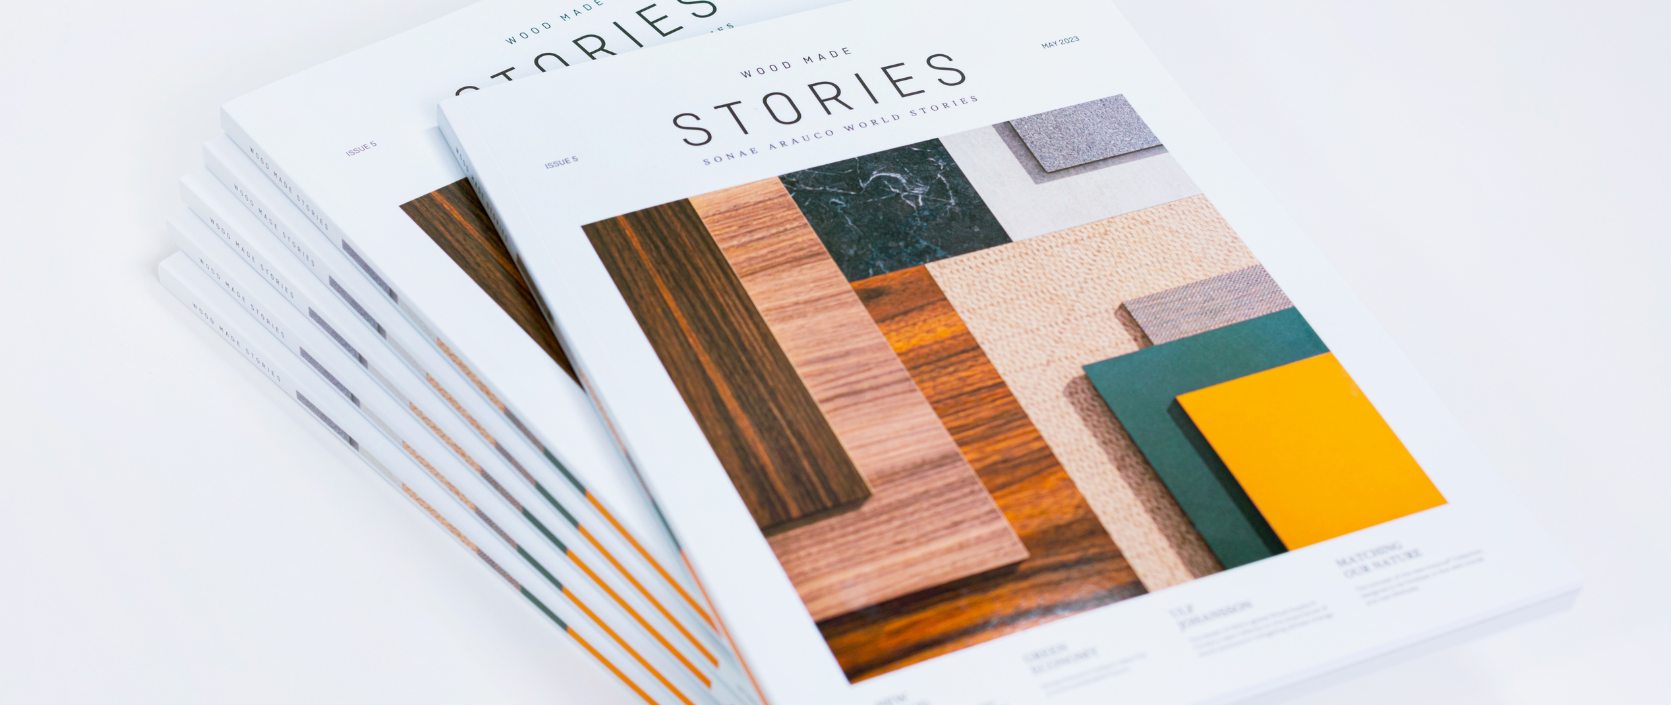 Sonae Arauco launches the fifth edition of Wood Made Stories magazine